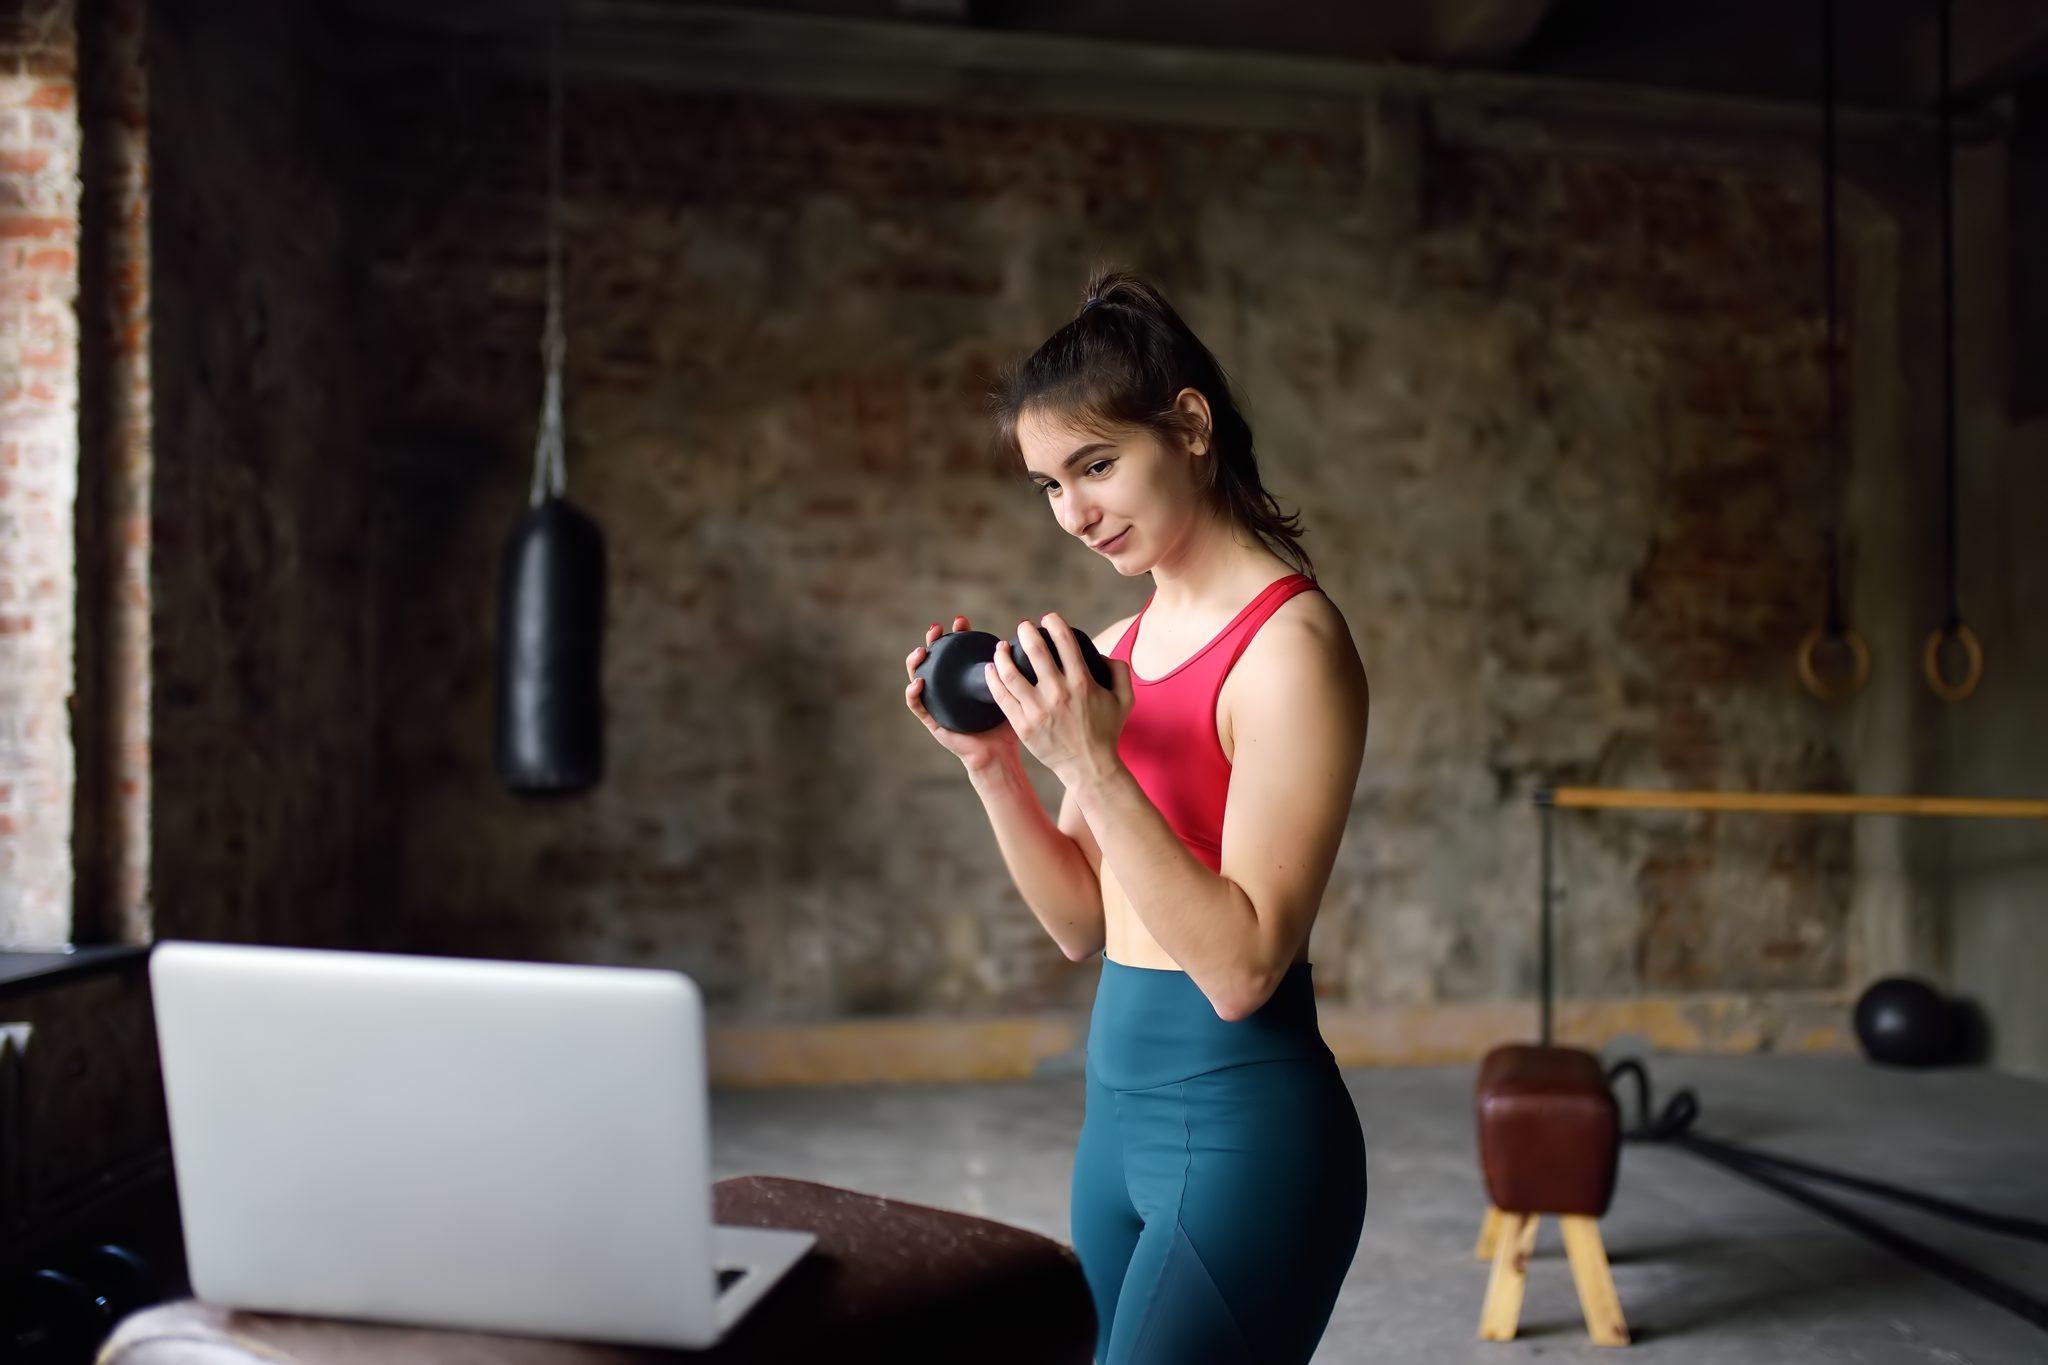 12 Top Fitness Need to Follow - Fitness and Gym Management Software - Glofox